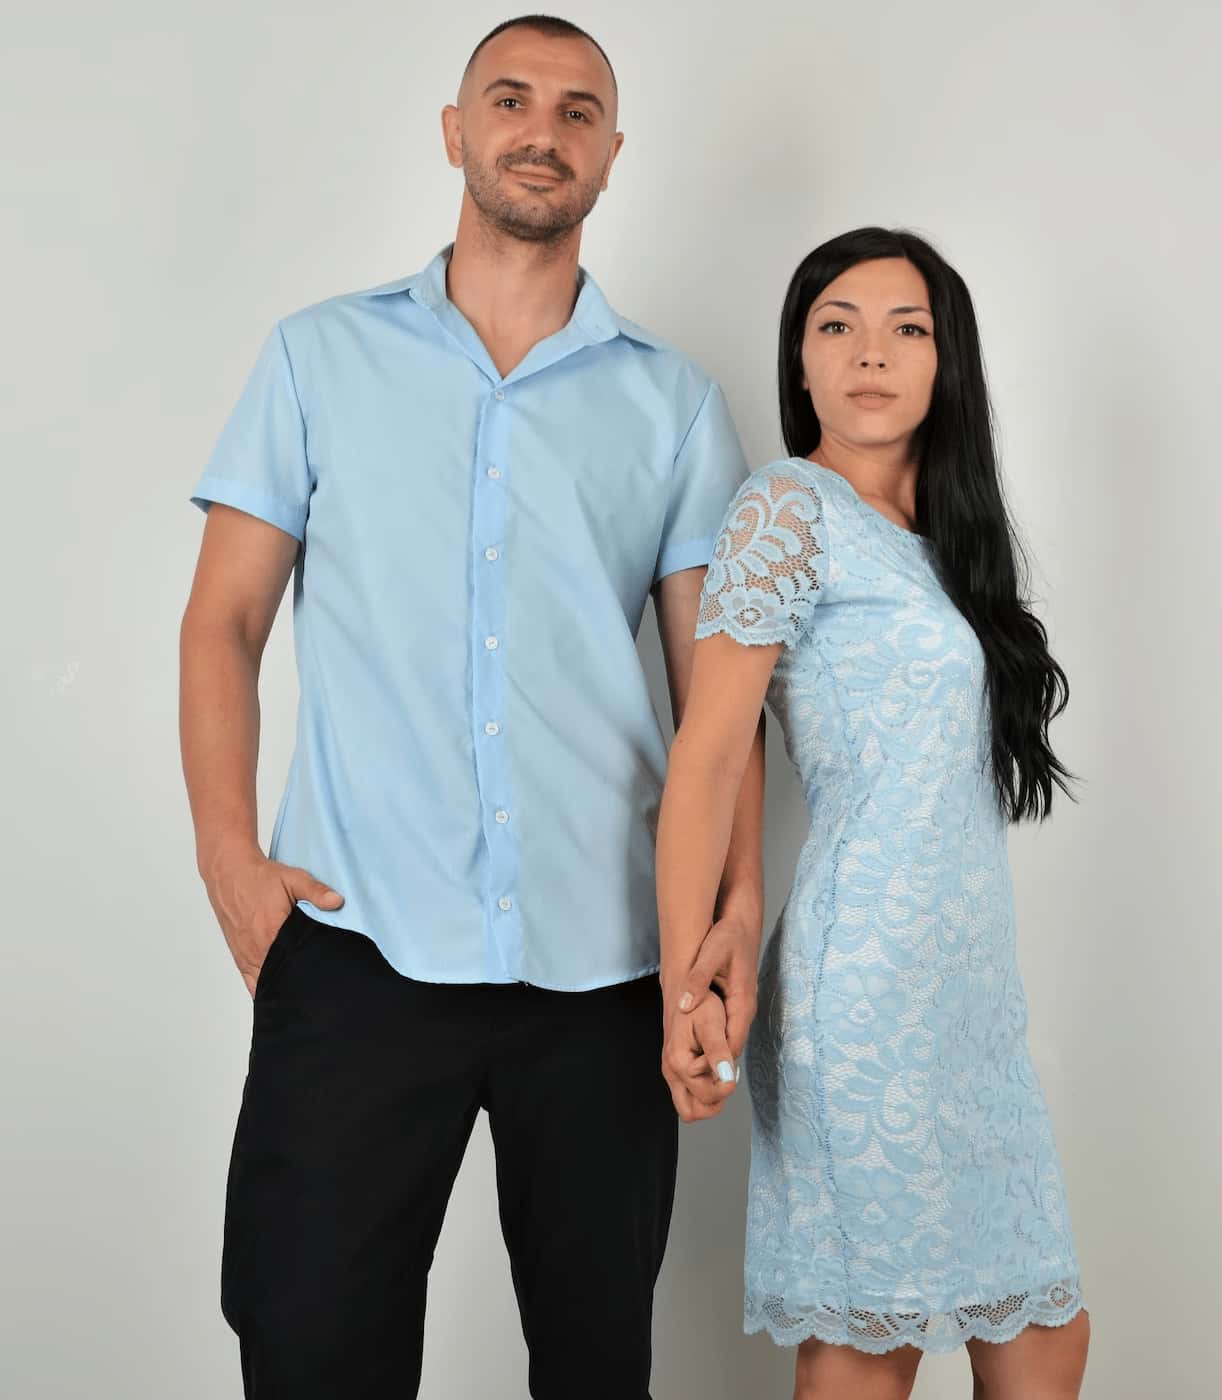 Matching Summer Outfit Ideas For Couples images 13